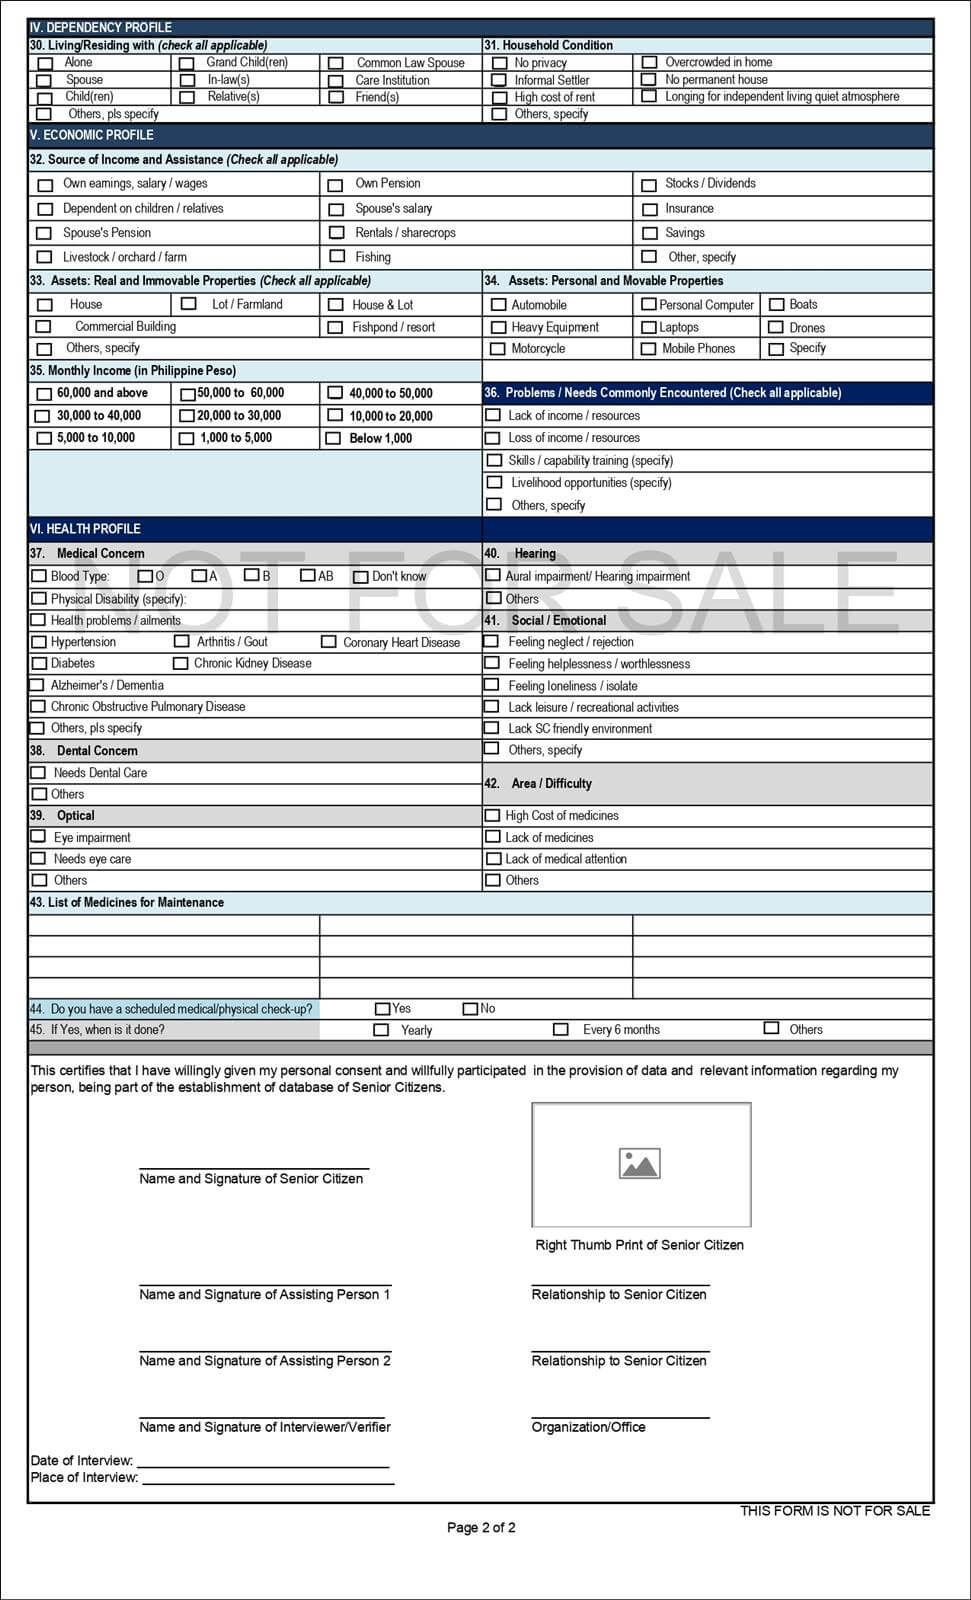 ncsc data form for senior citizens_page-0002